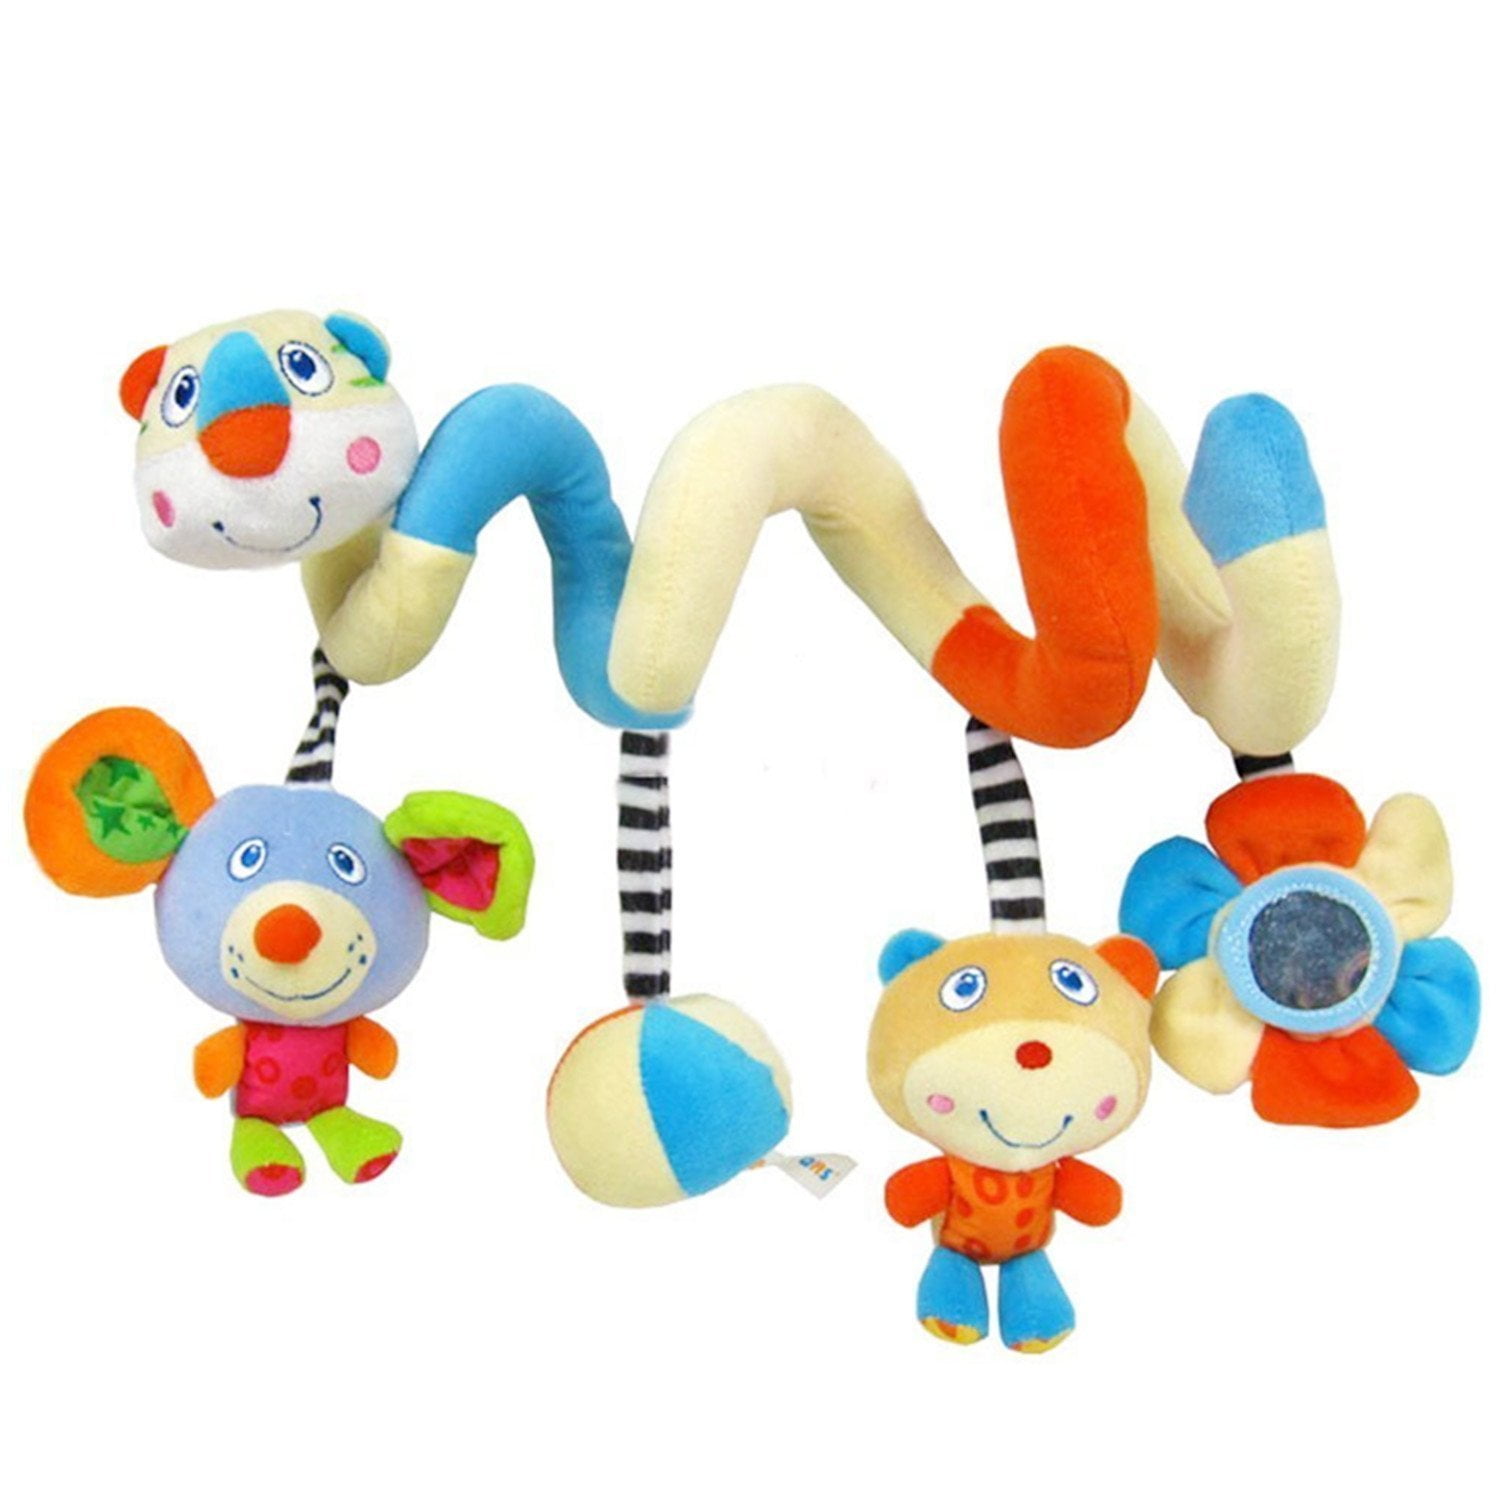 car seat toys for baby girl